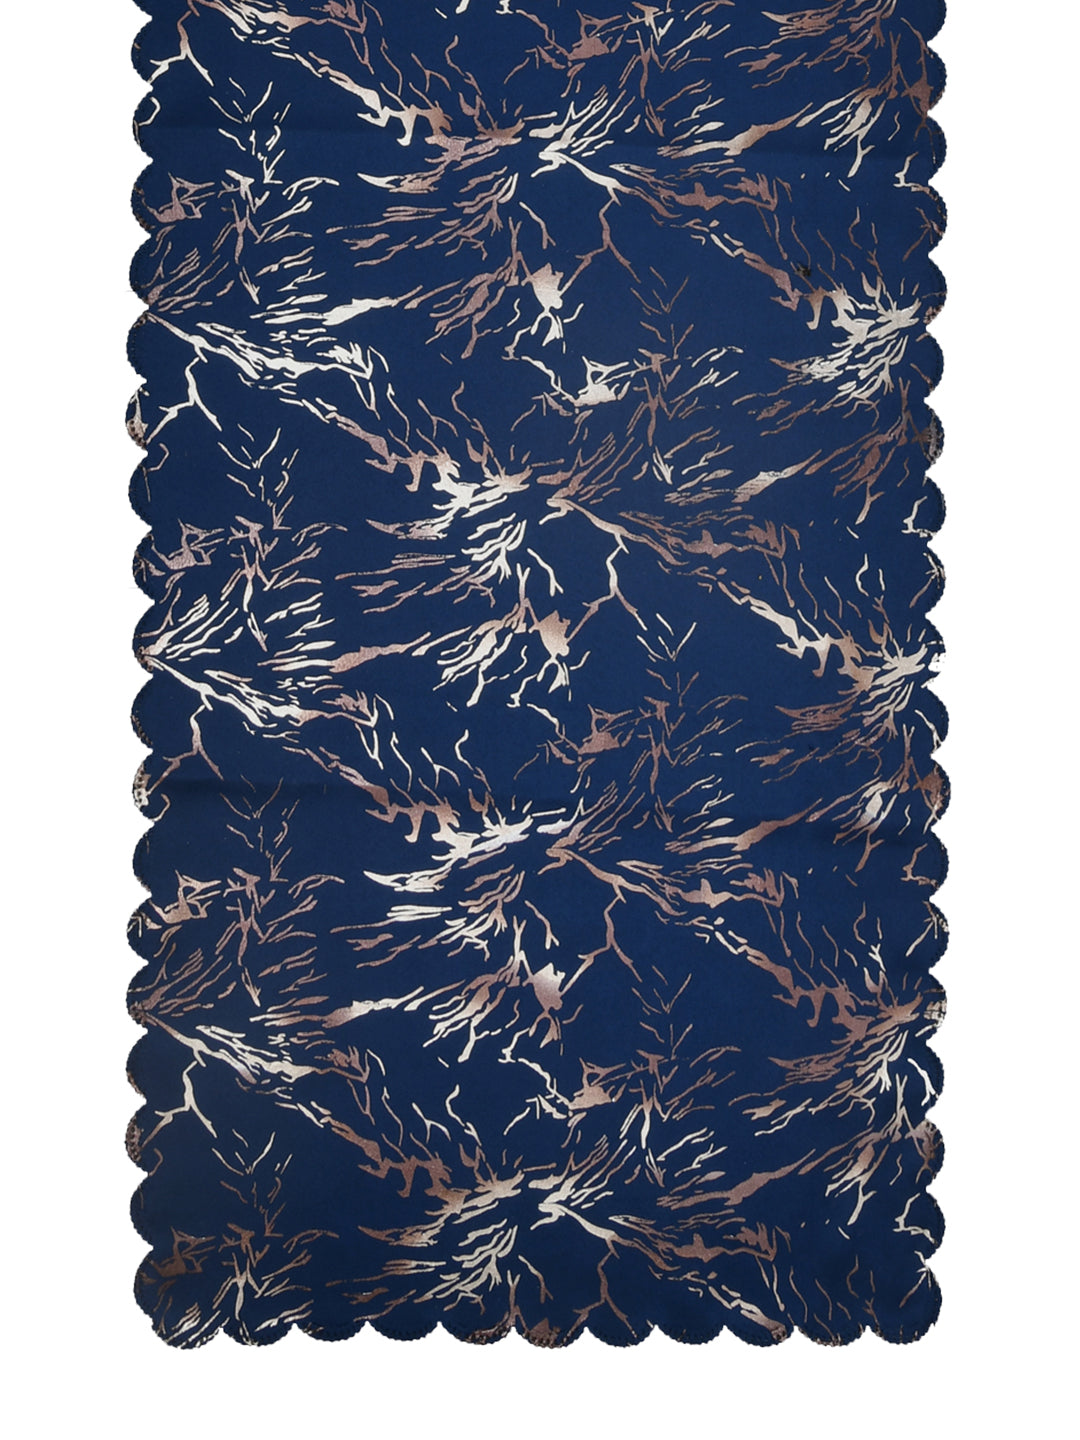 Table Runner; 15x72 Inches; Abstract Print On Blue